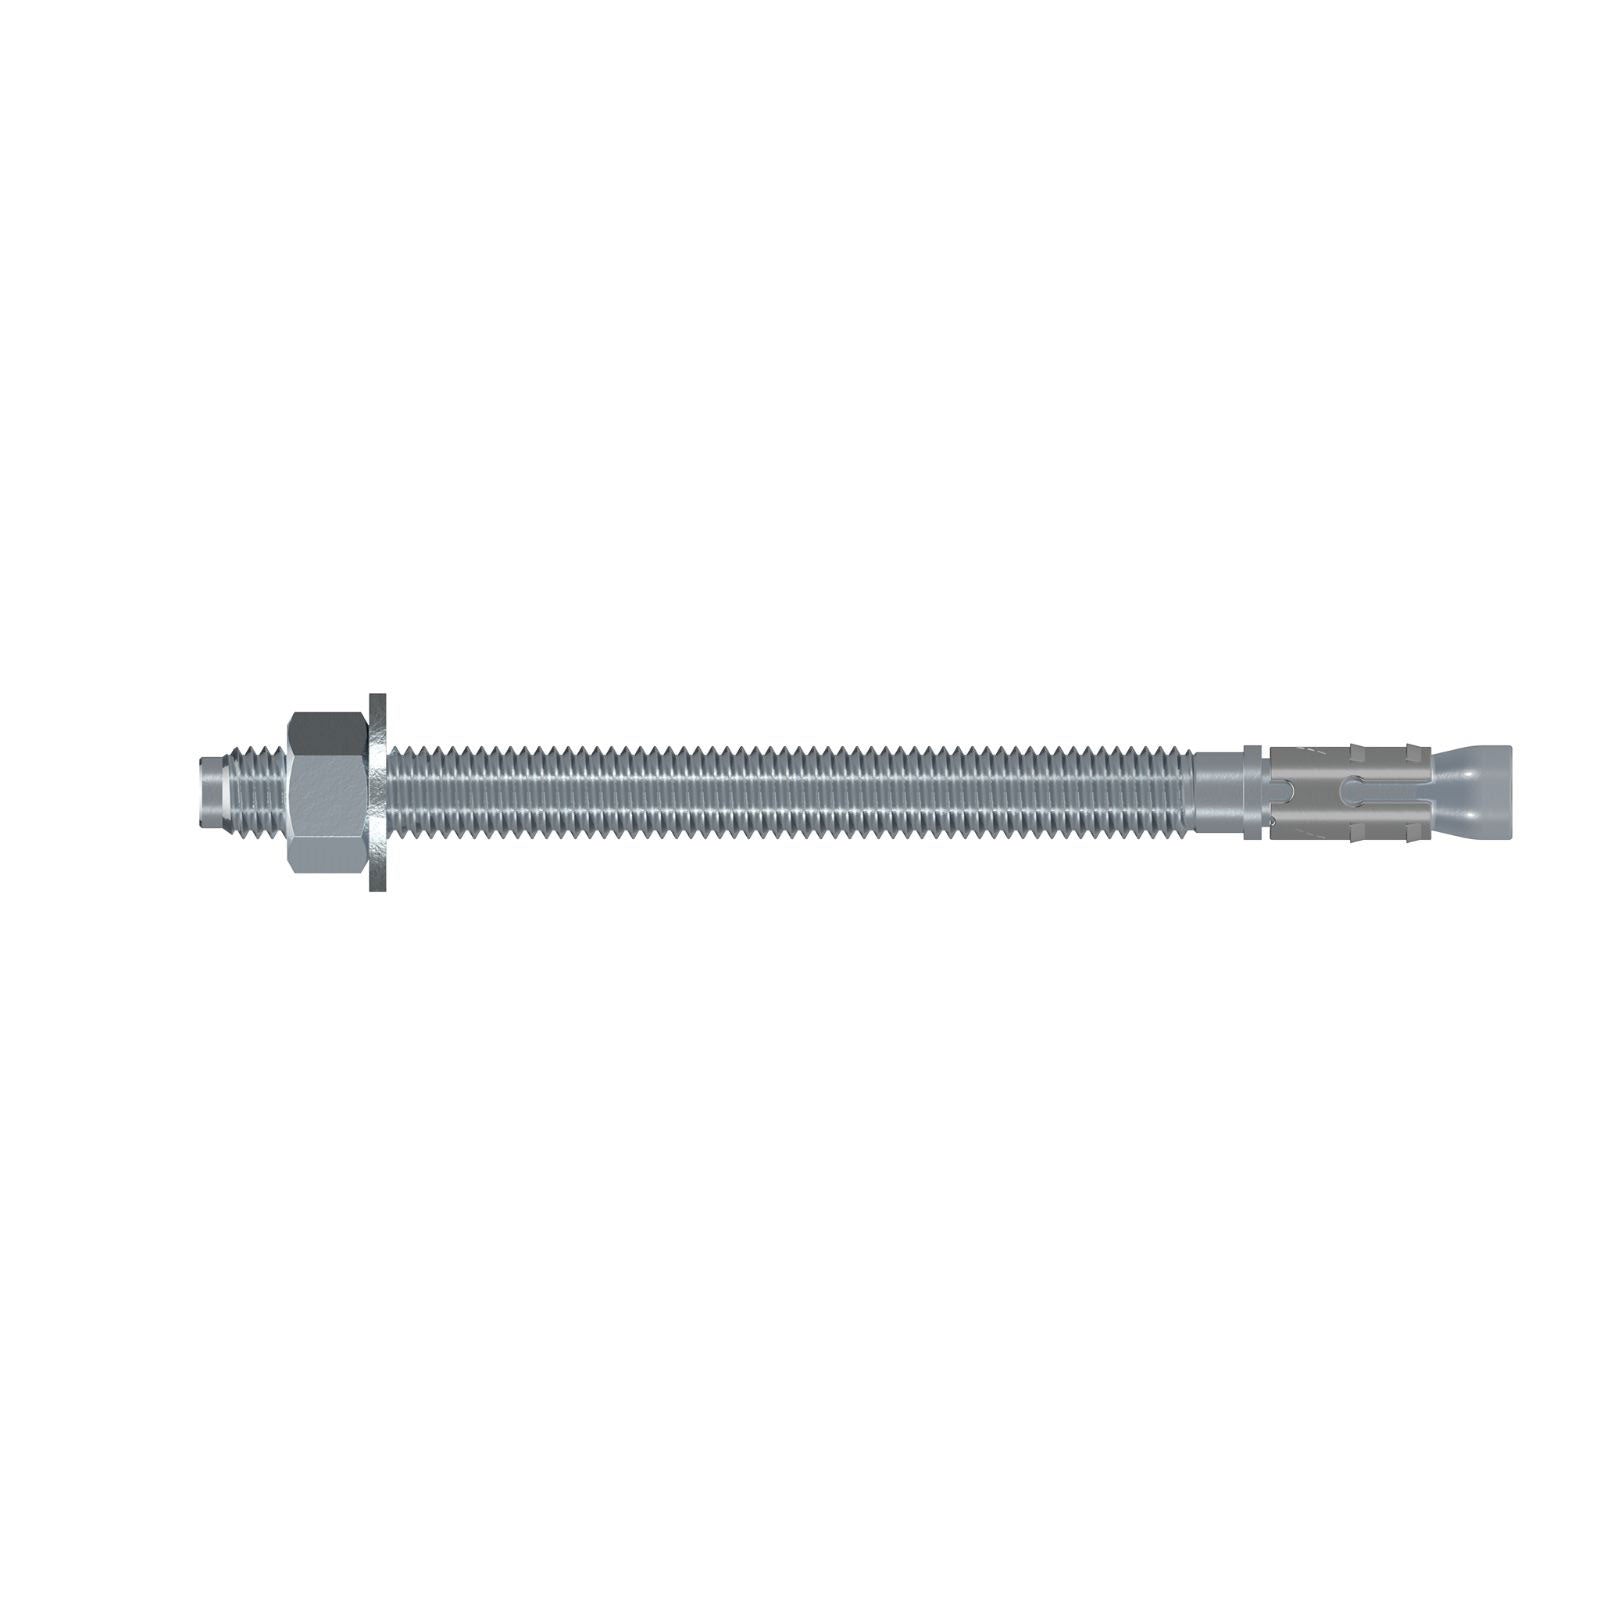 3/8" x 7" Simpson Strong Bolt 2 Wedge Anchor, Stainless Steel